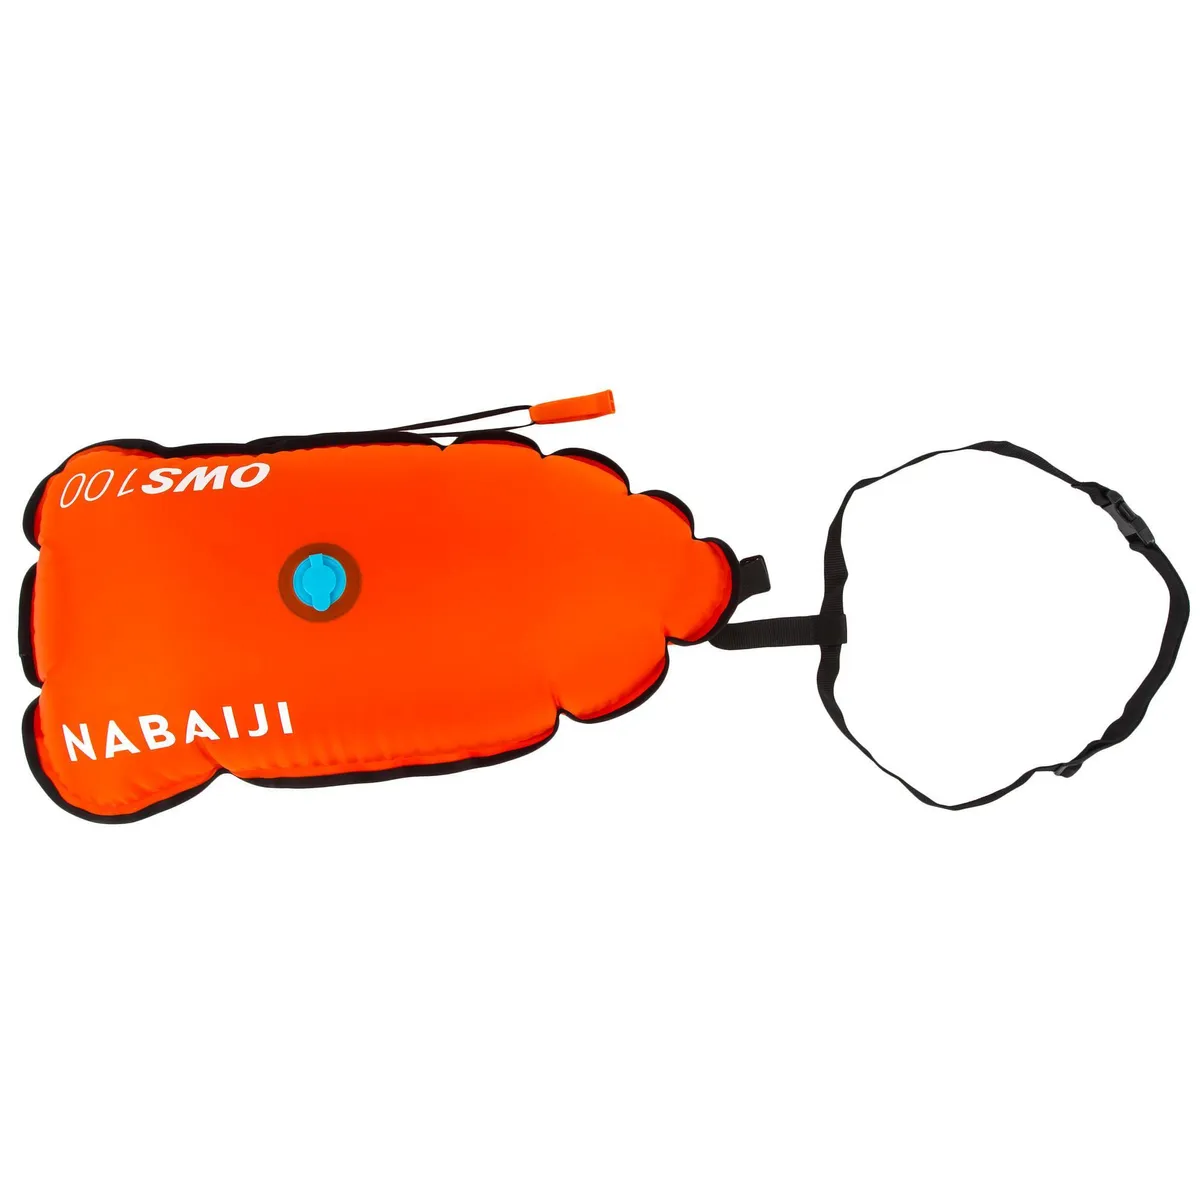 An orange inflatable tow float with a black cord on a white background.